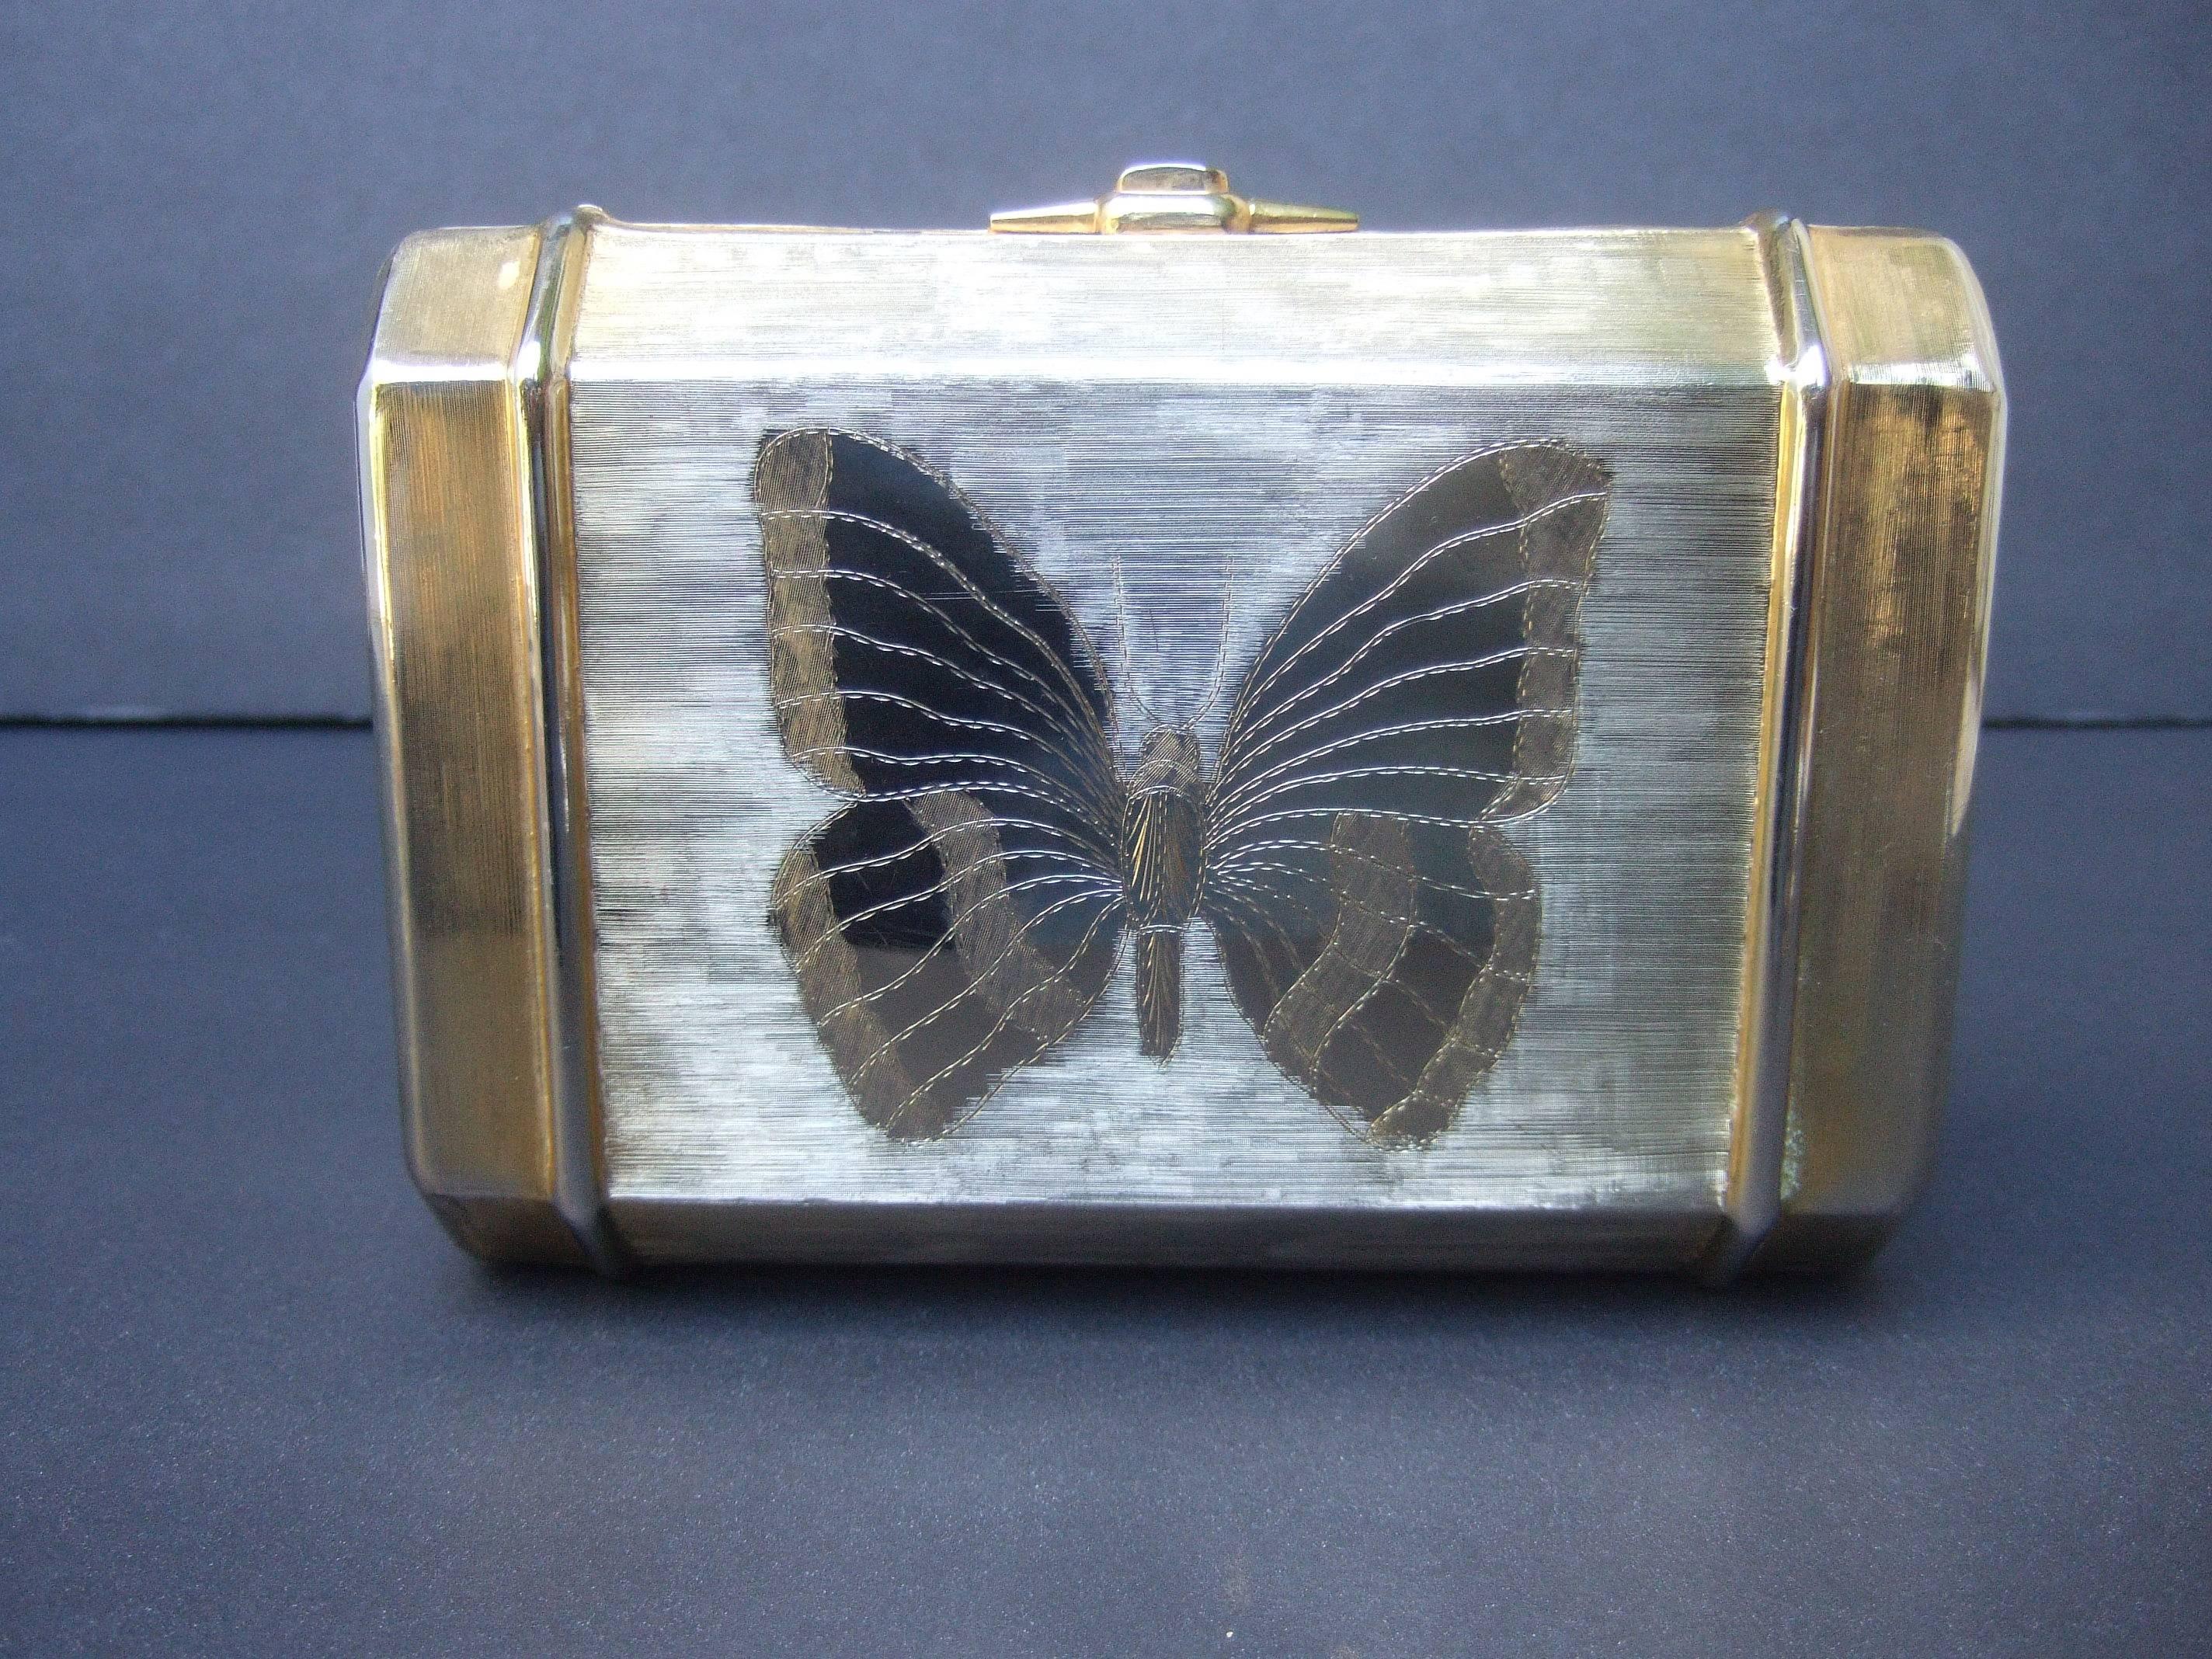 Saks Fifth Avenue Opulent gilt metal evening bag 
The elegant gold metal purse is adorned with an
etched butterfly on both exterior panels

The gold metal covering has a brushed satiny finish
The butterfly in contrast has smooth polish gold